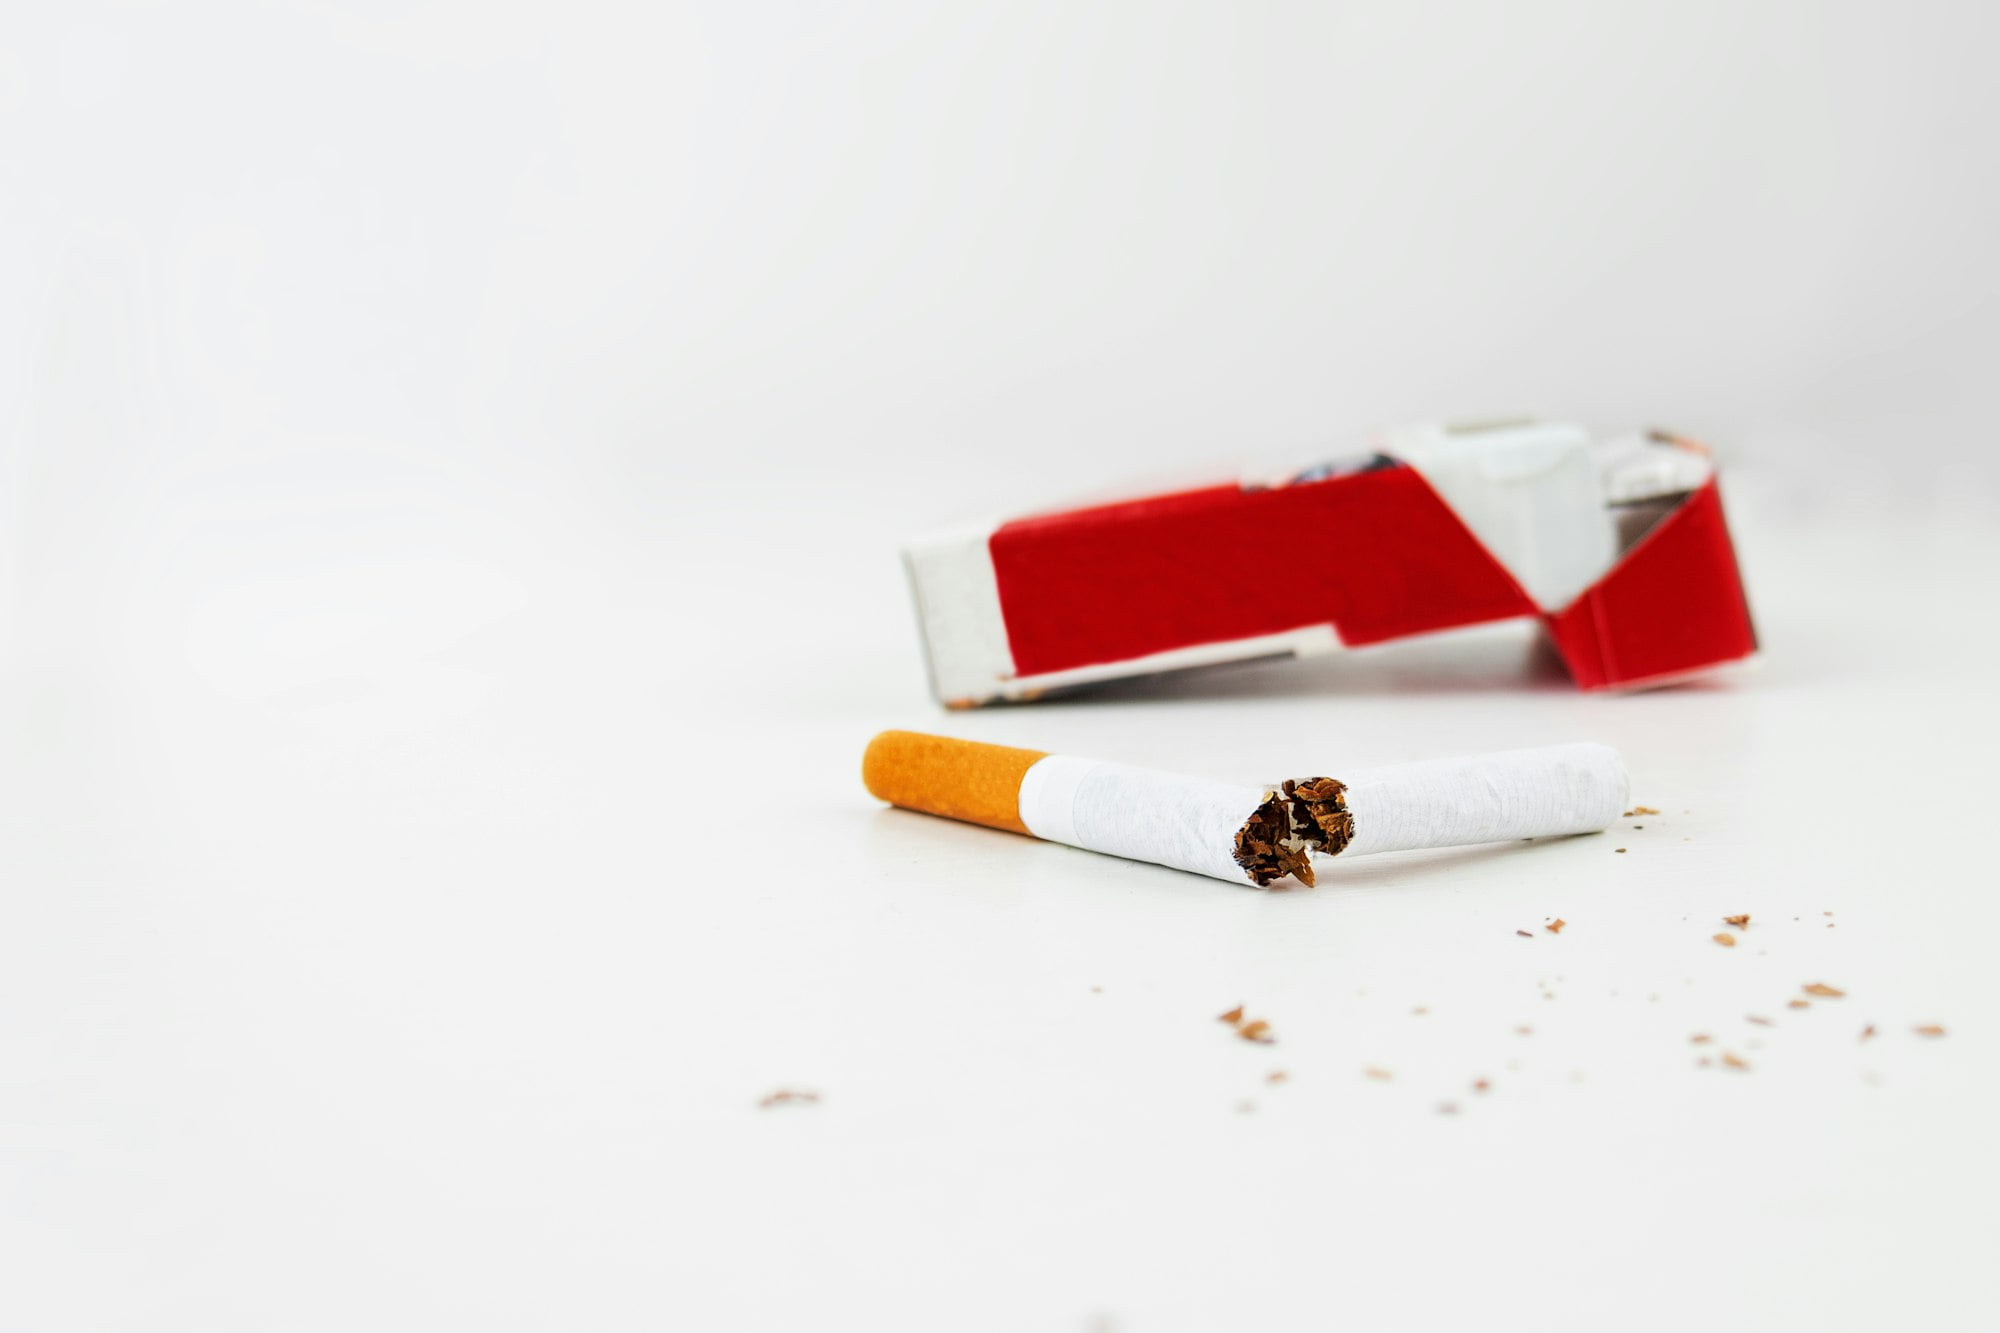 A pack of cigarettes on a white background and a broken cigarette in the foreground.